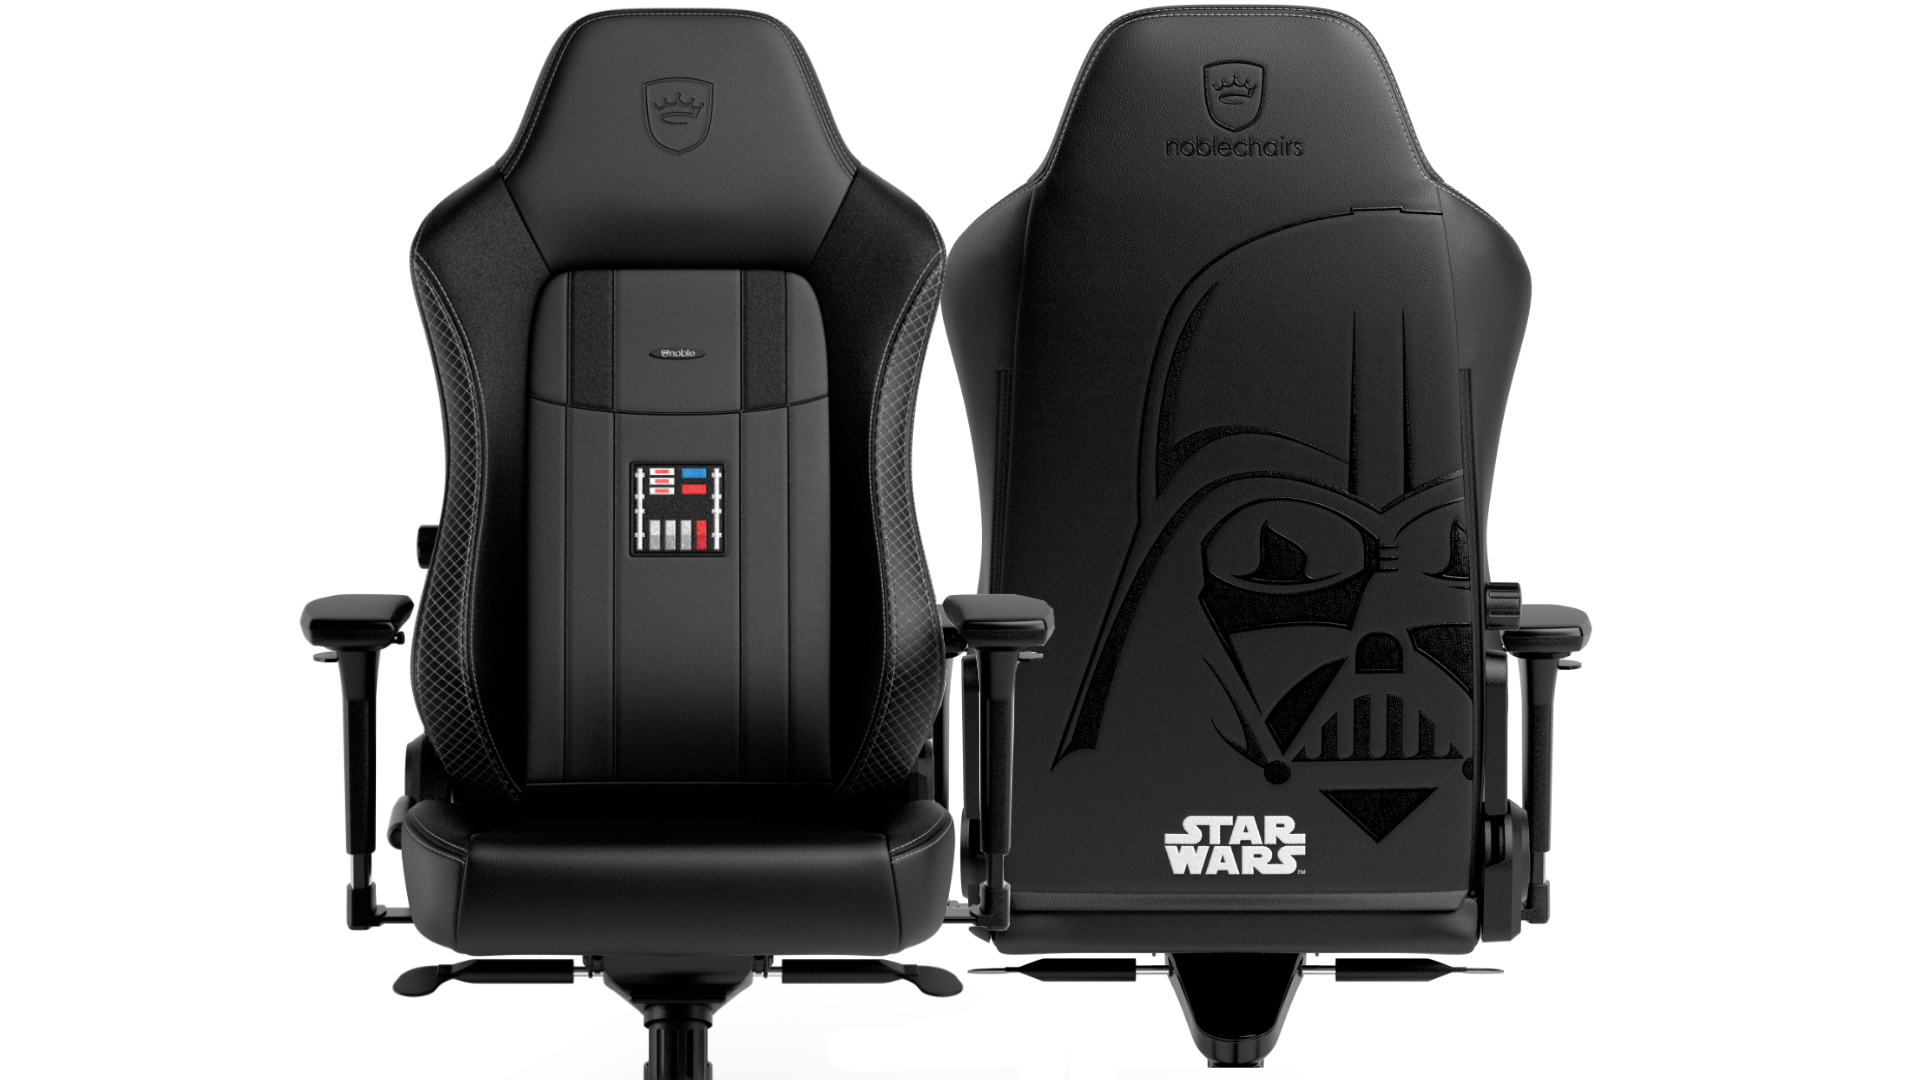 Celebrate the Obi-Wan Kenobi show with a Darth Vader gaming chair